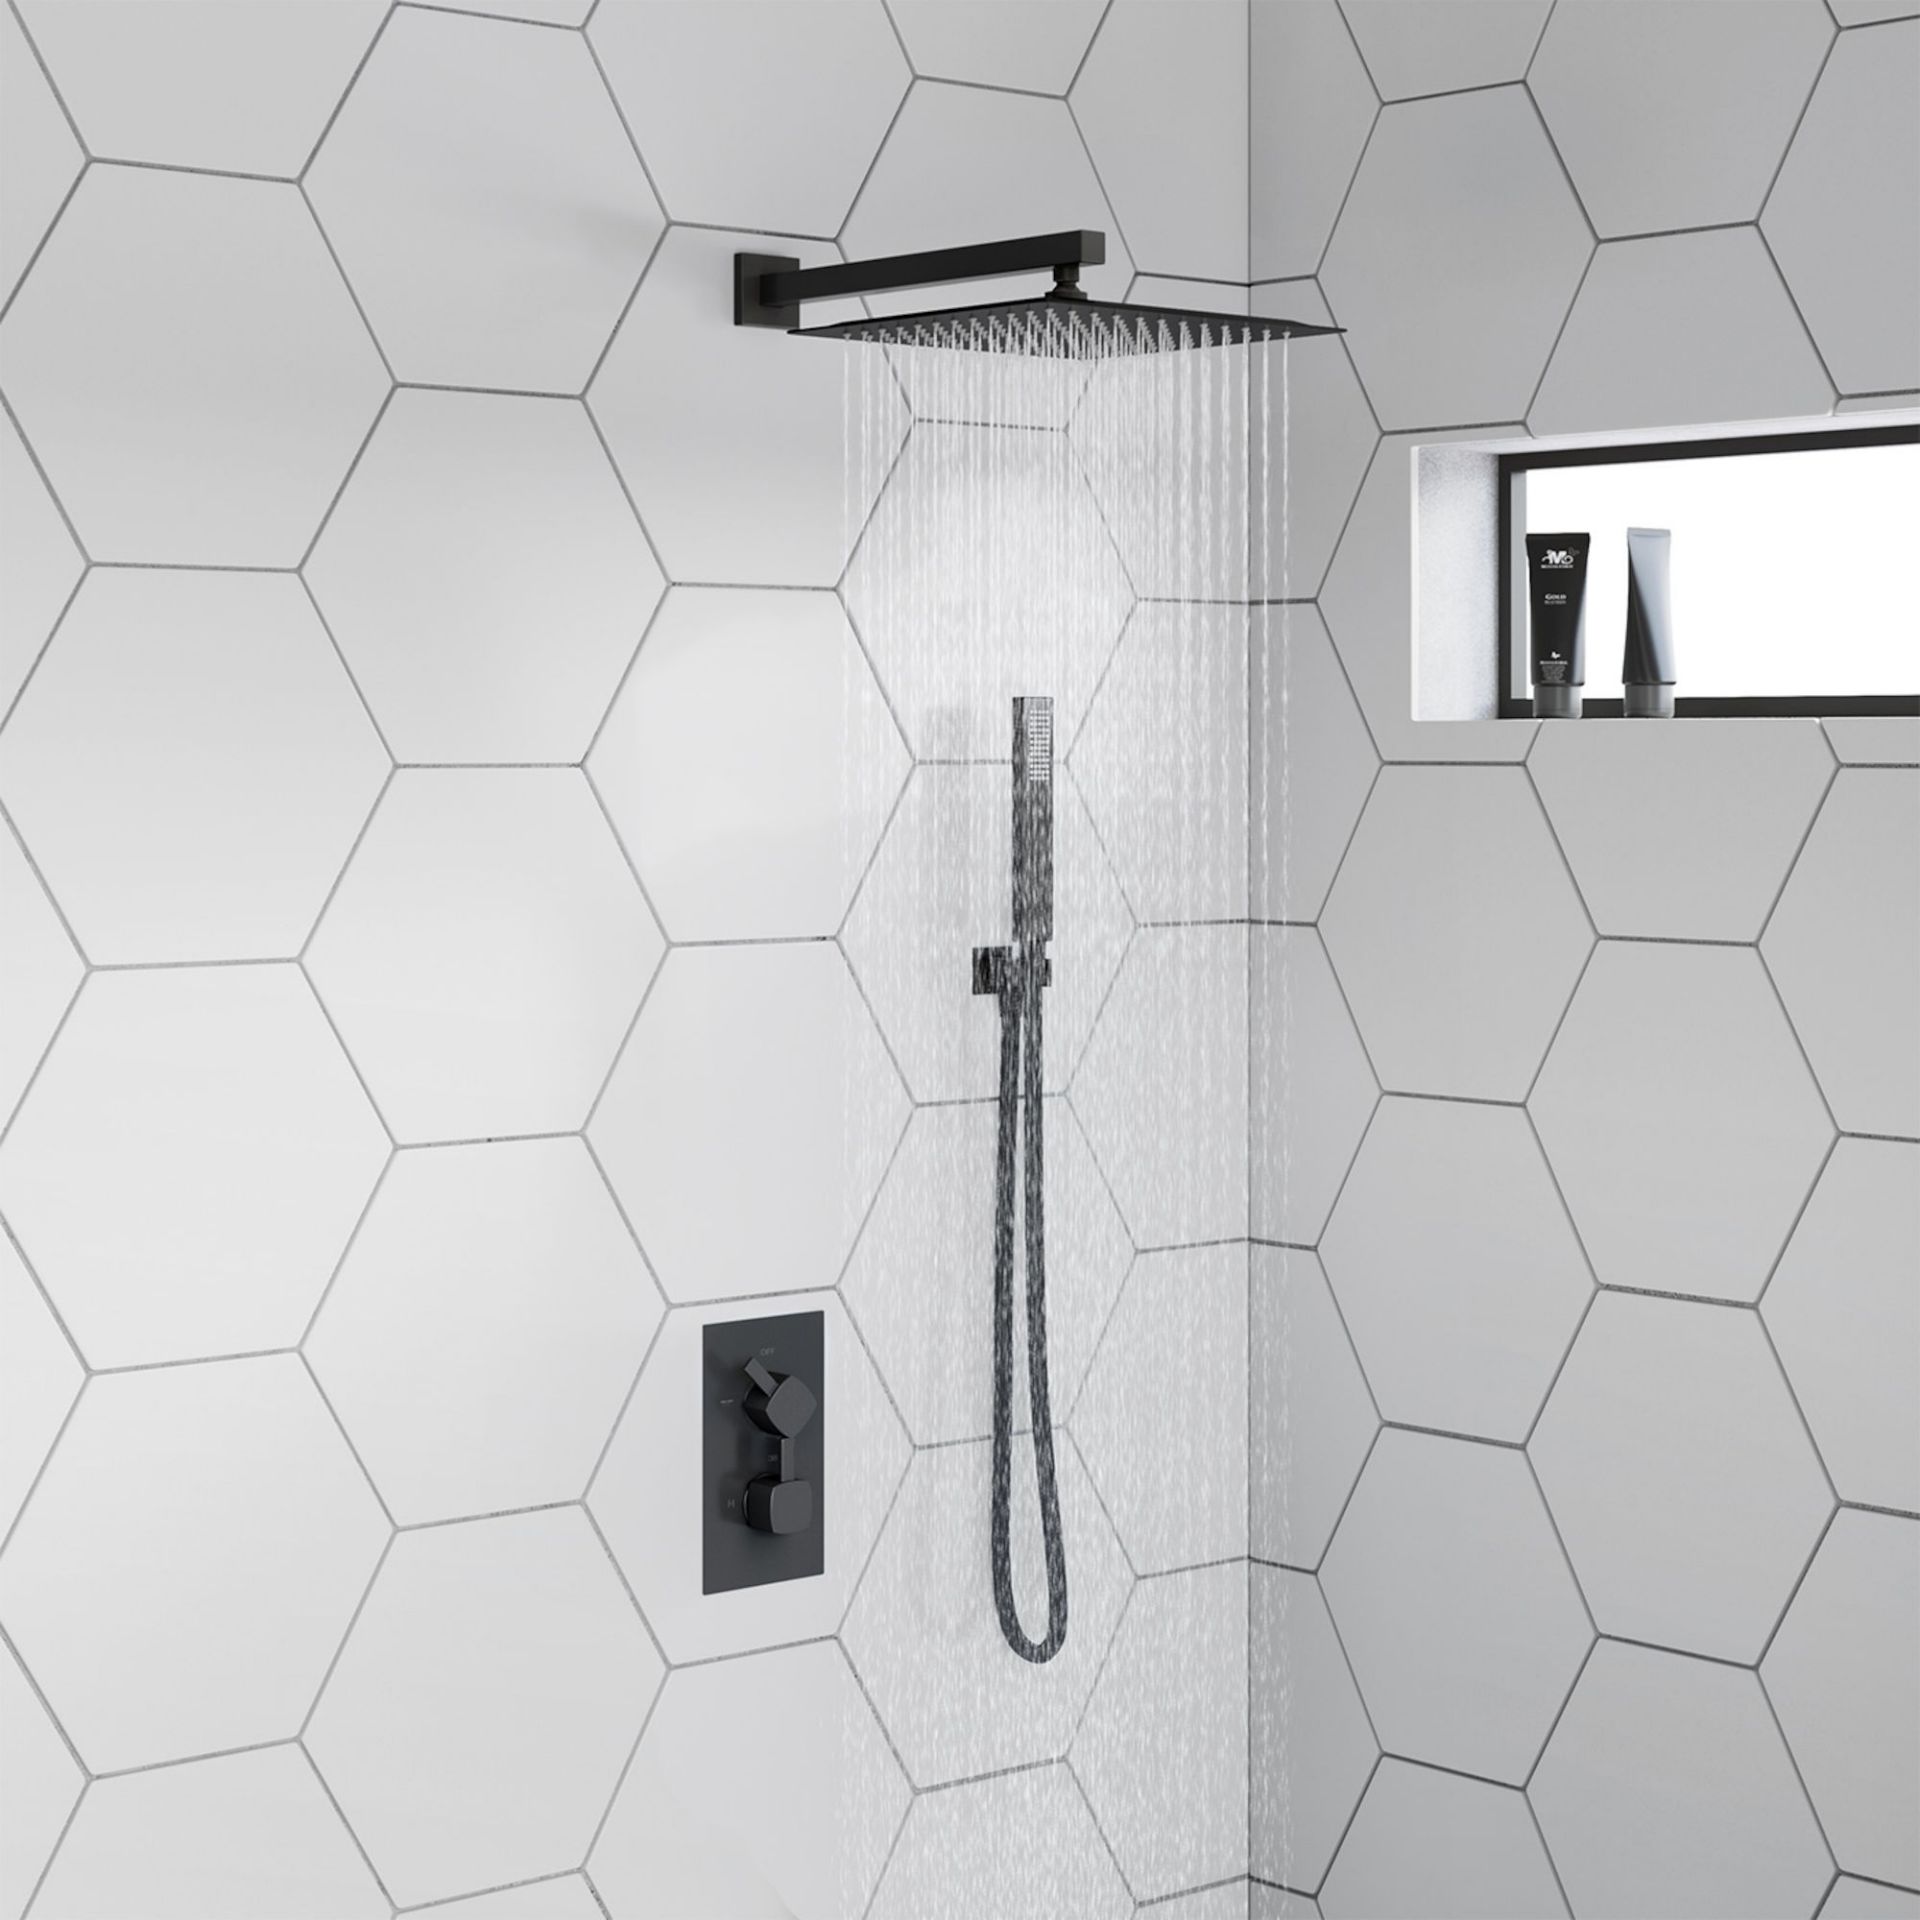 (OS123) Matte Black Square Concealed Thermostatic Mixer Shower Kit & Large Head. RRP £449.99.